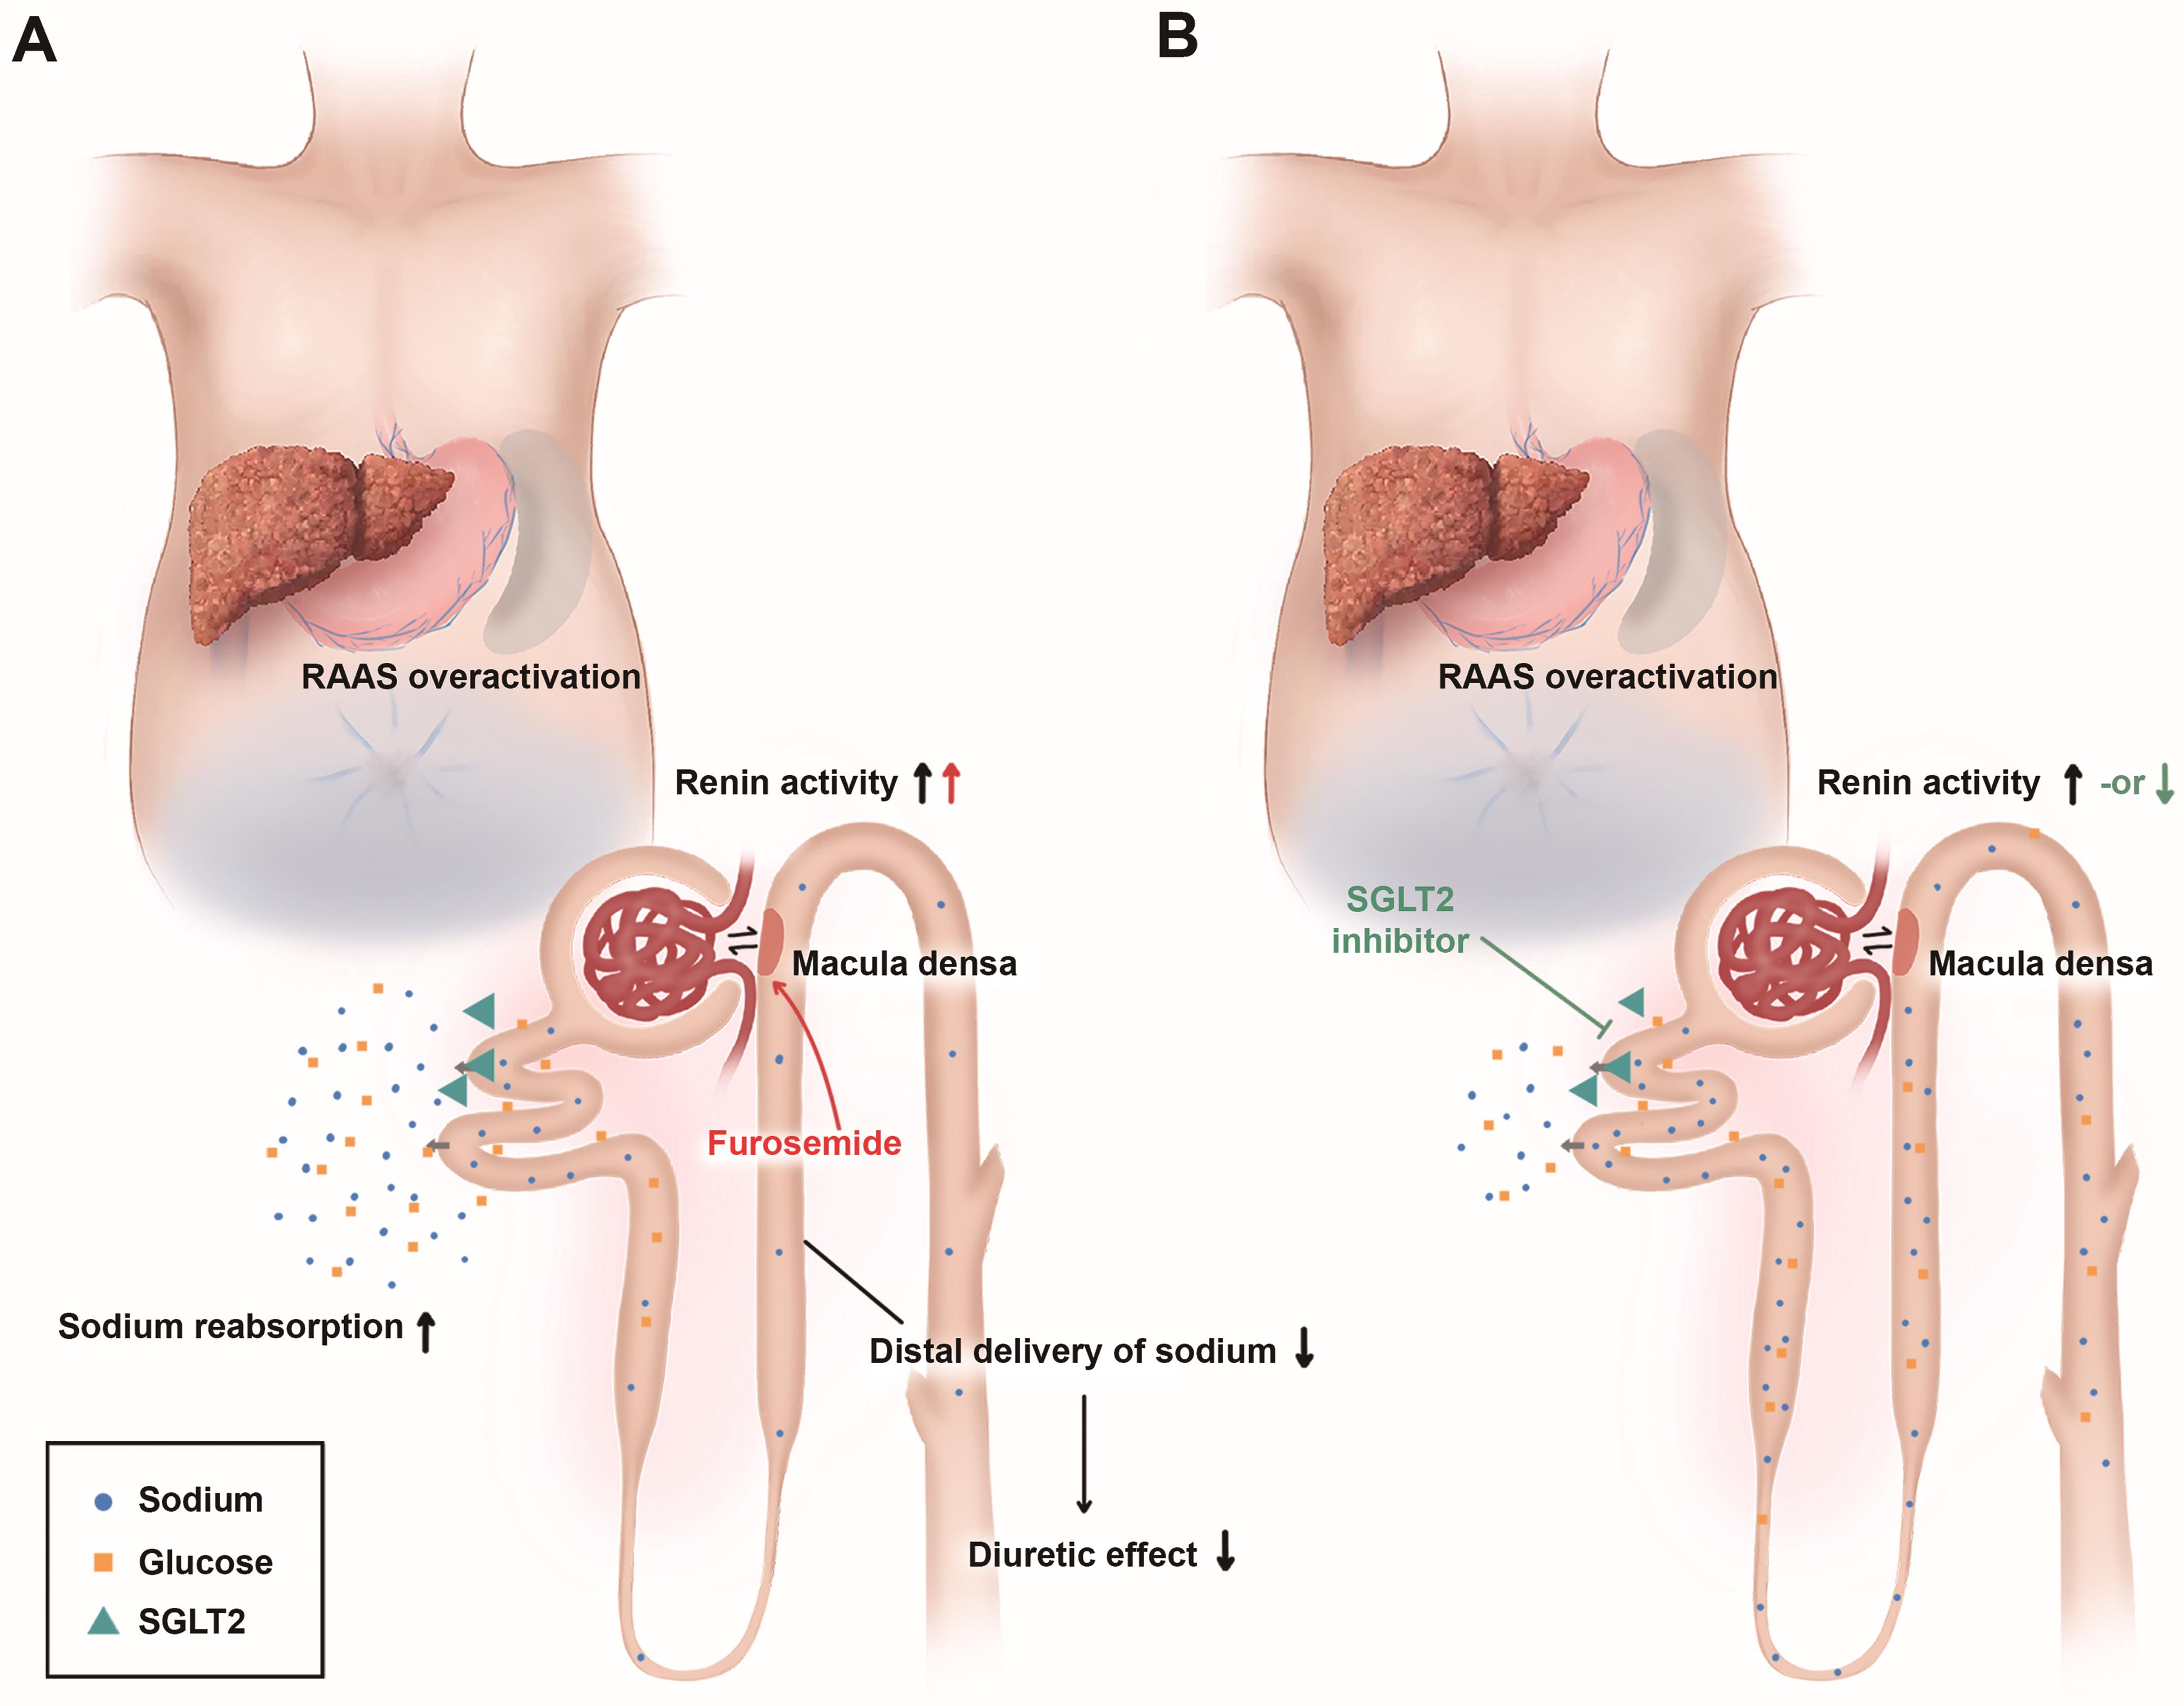 Pathophysiology of cirrhotic ascites and the mechanism of action of SGLT2 inhibitors.